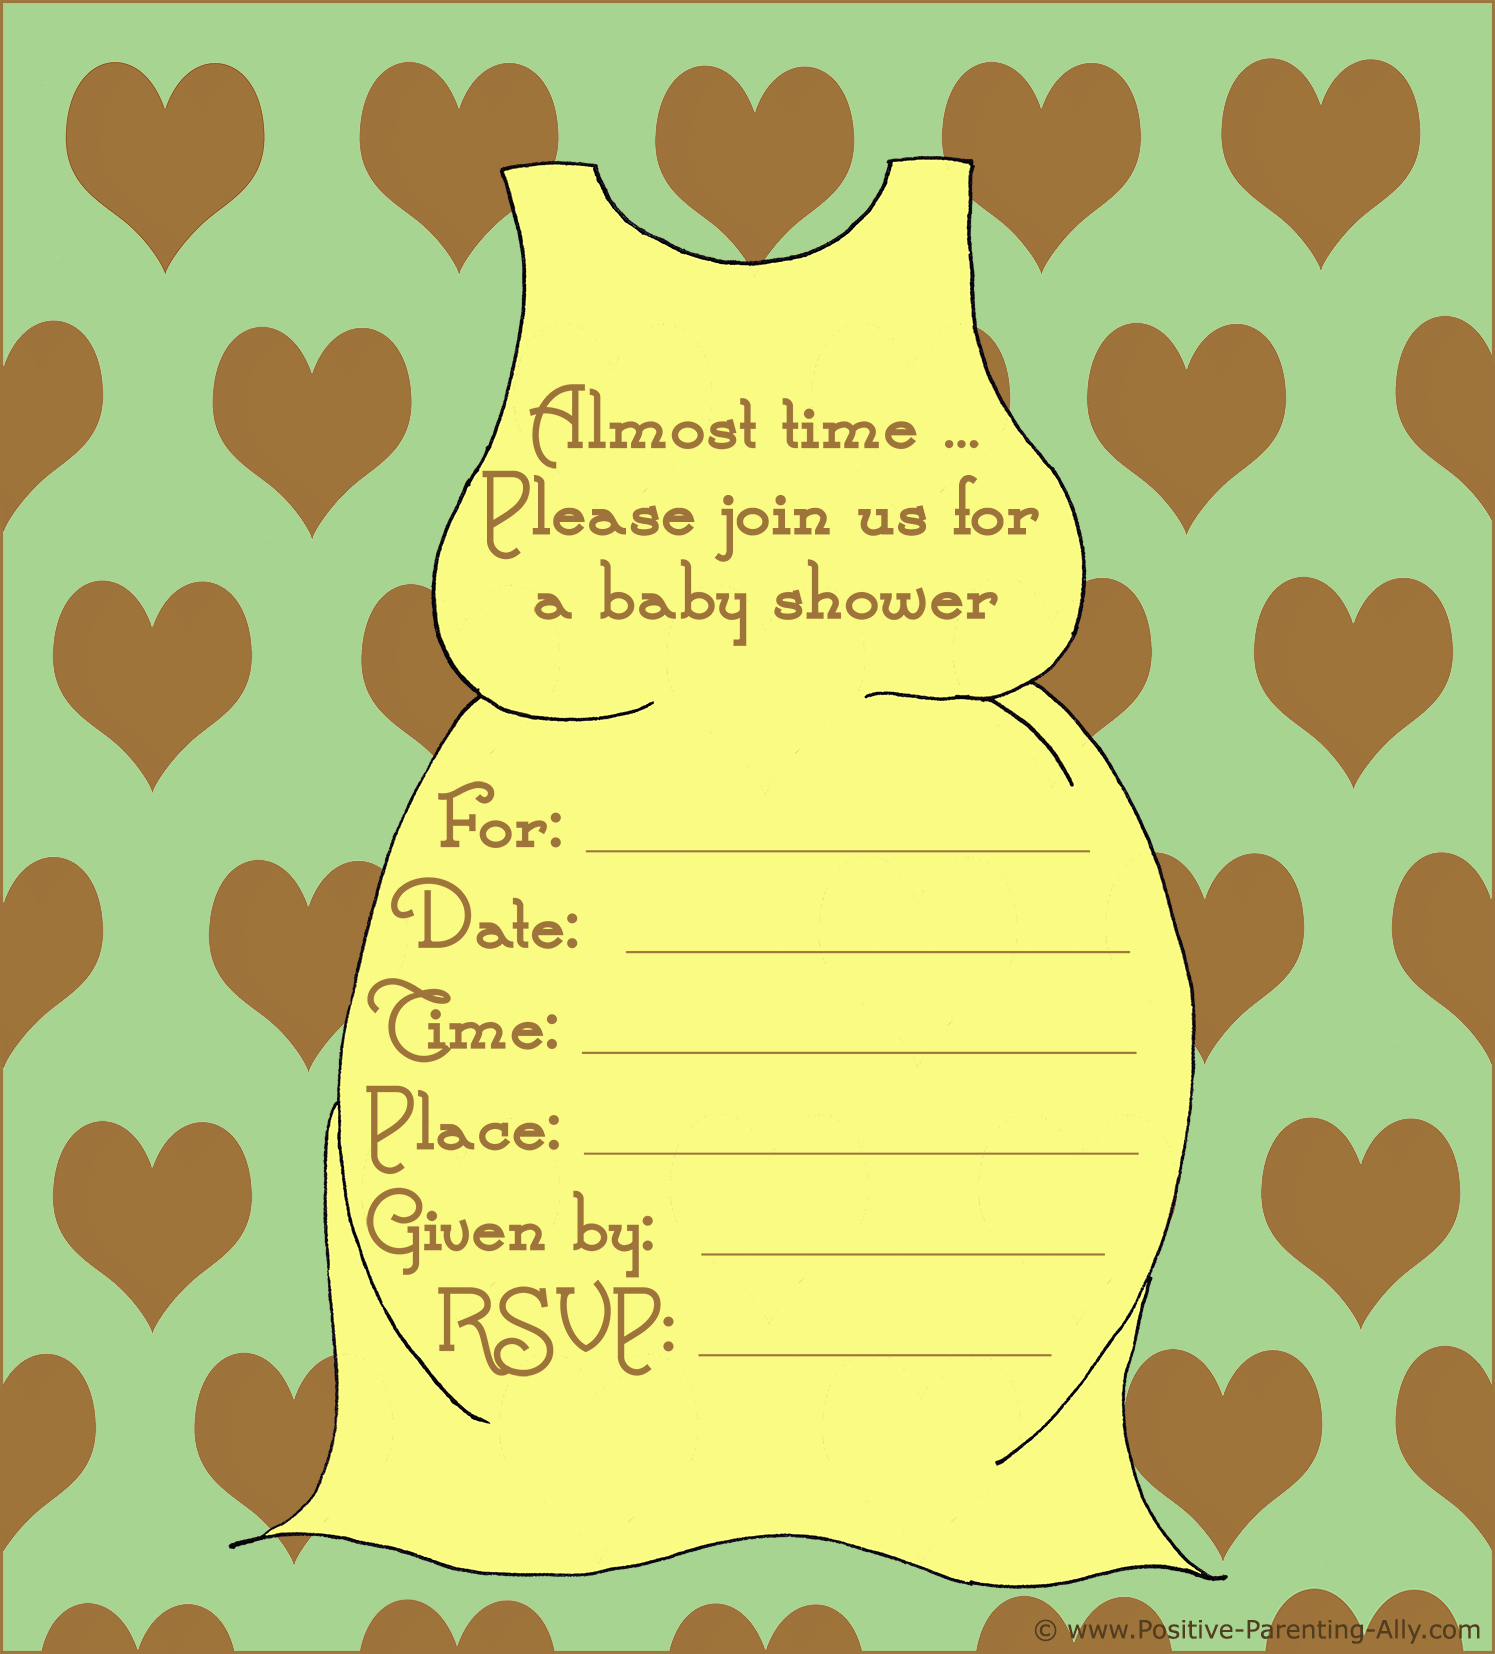 Free Printable Baby Shower Invitations In High Quality intérieur Cadeau Invité Baby Shower